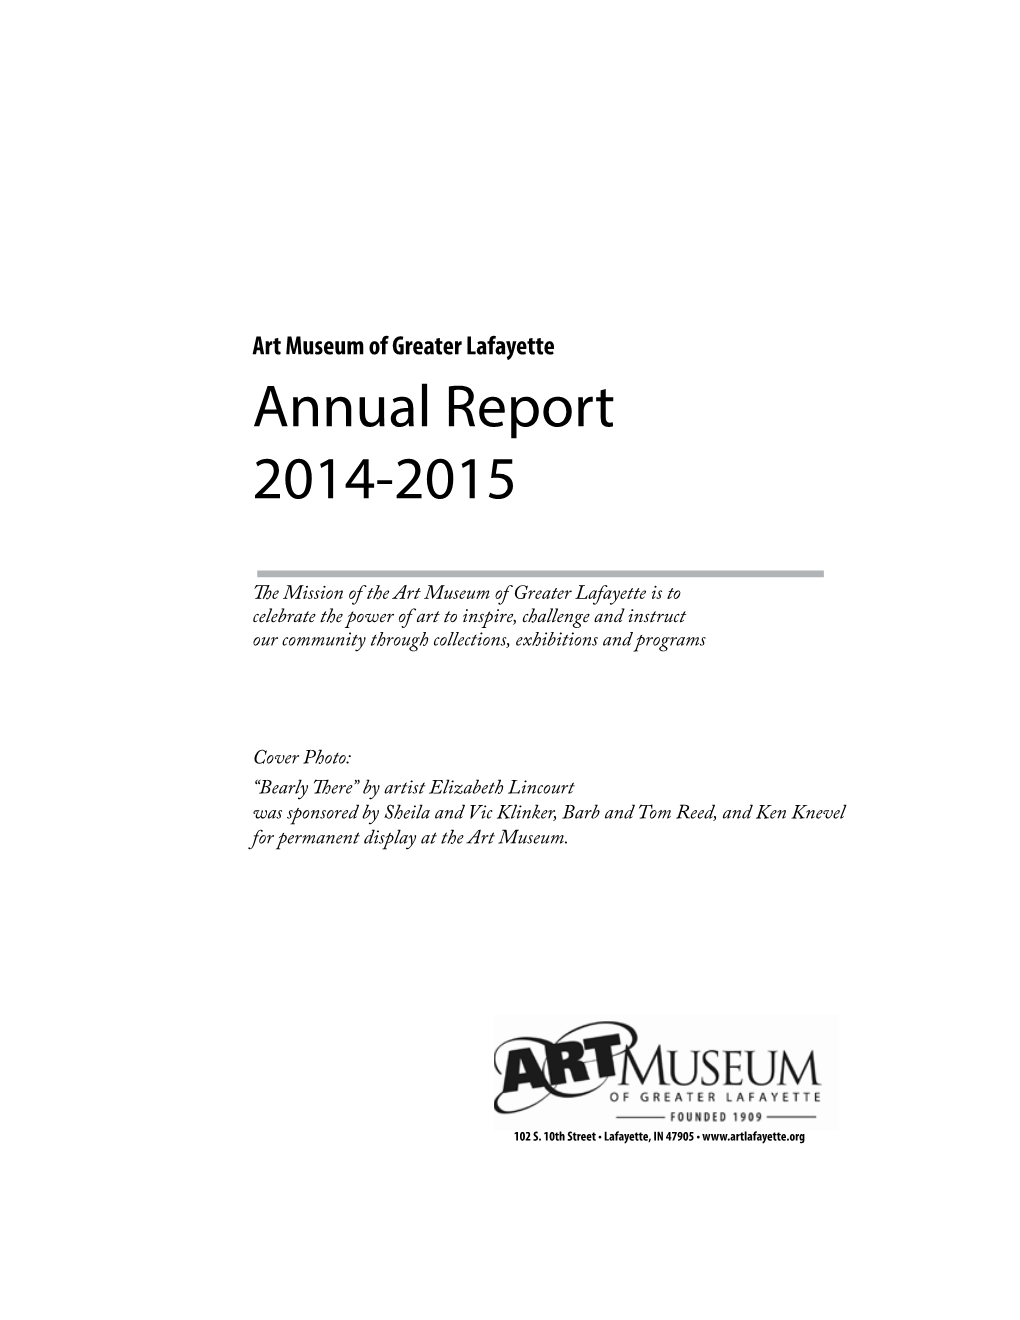 Art Museum of Greater Lafayette Annual Report 2014-2015